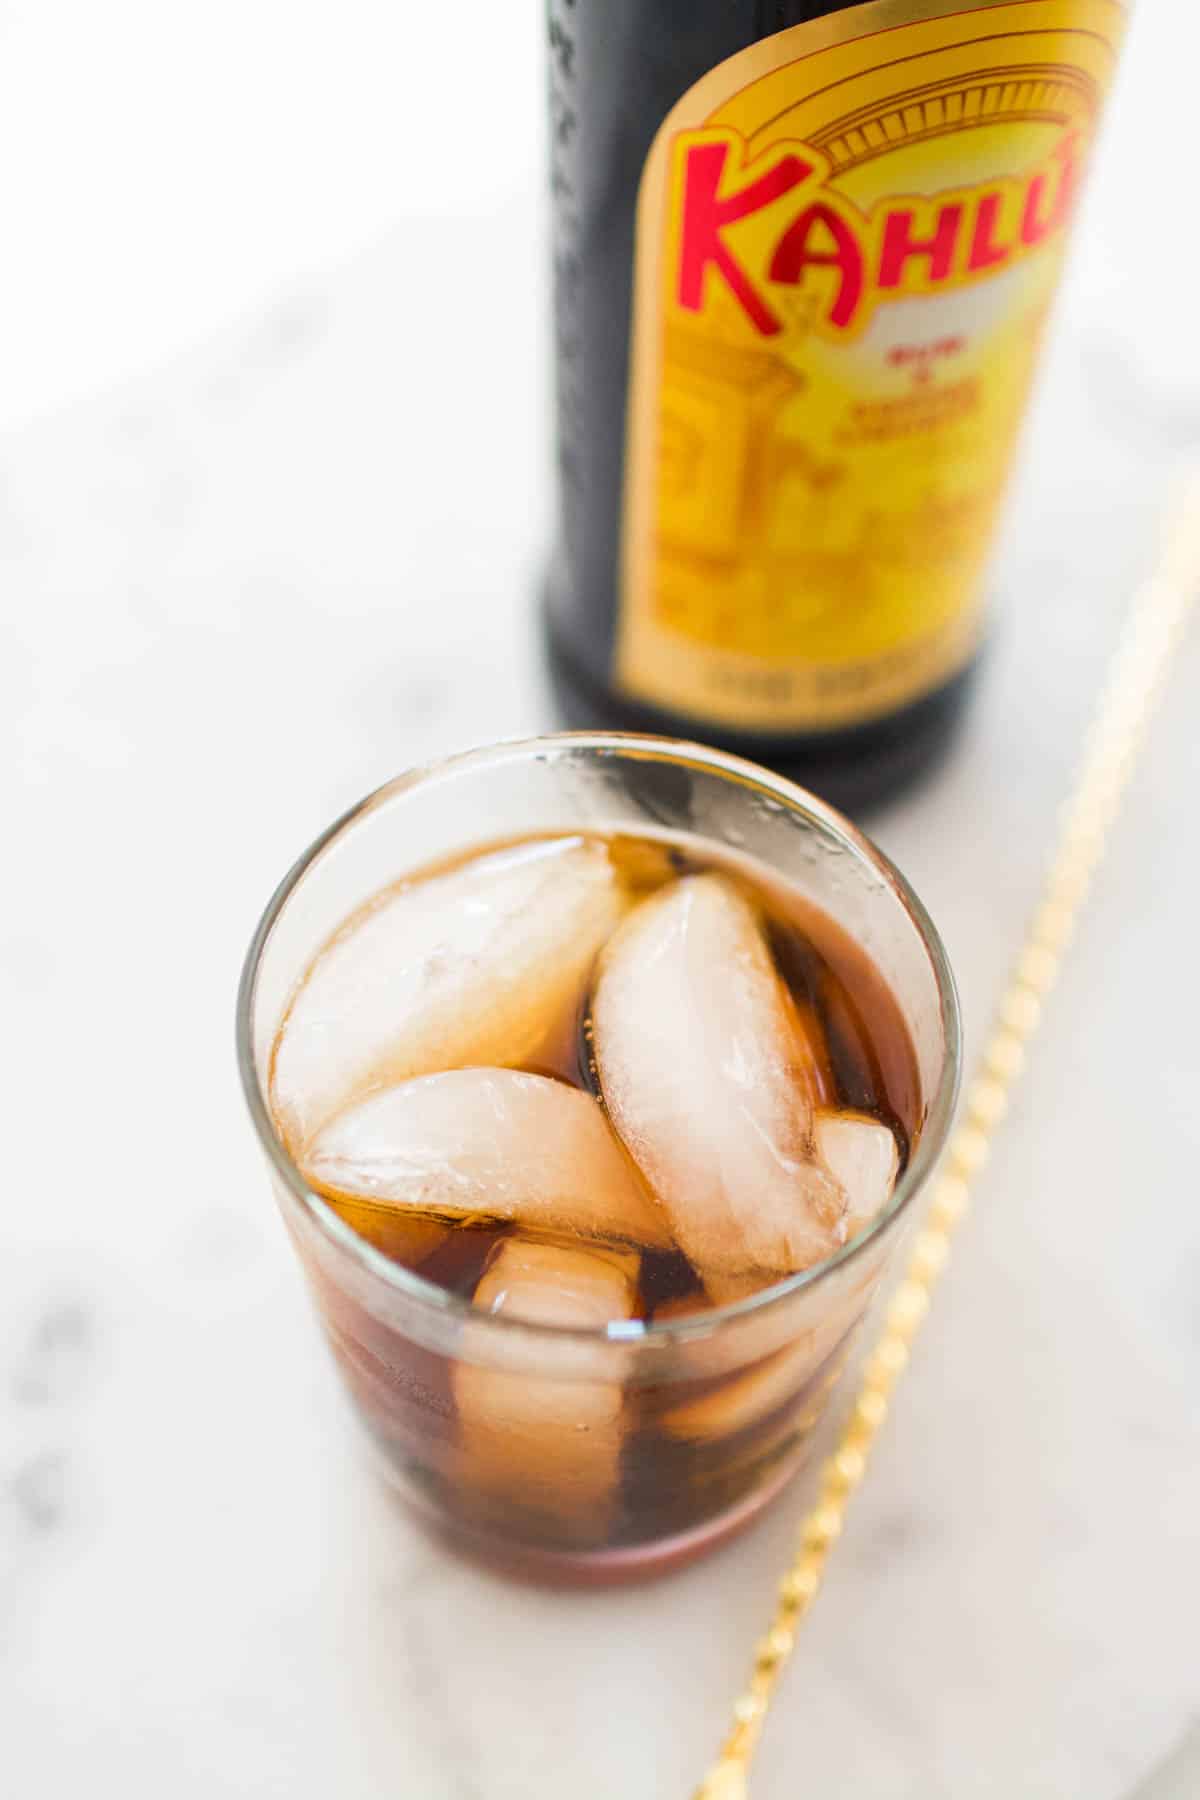 A 2 ingredient Black Russian drink in a glass next to a bottle of Kahlua.